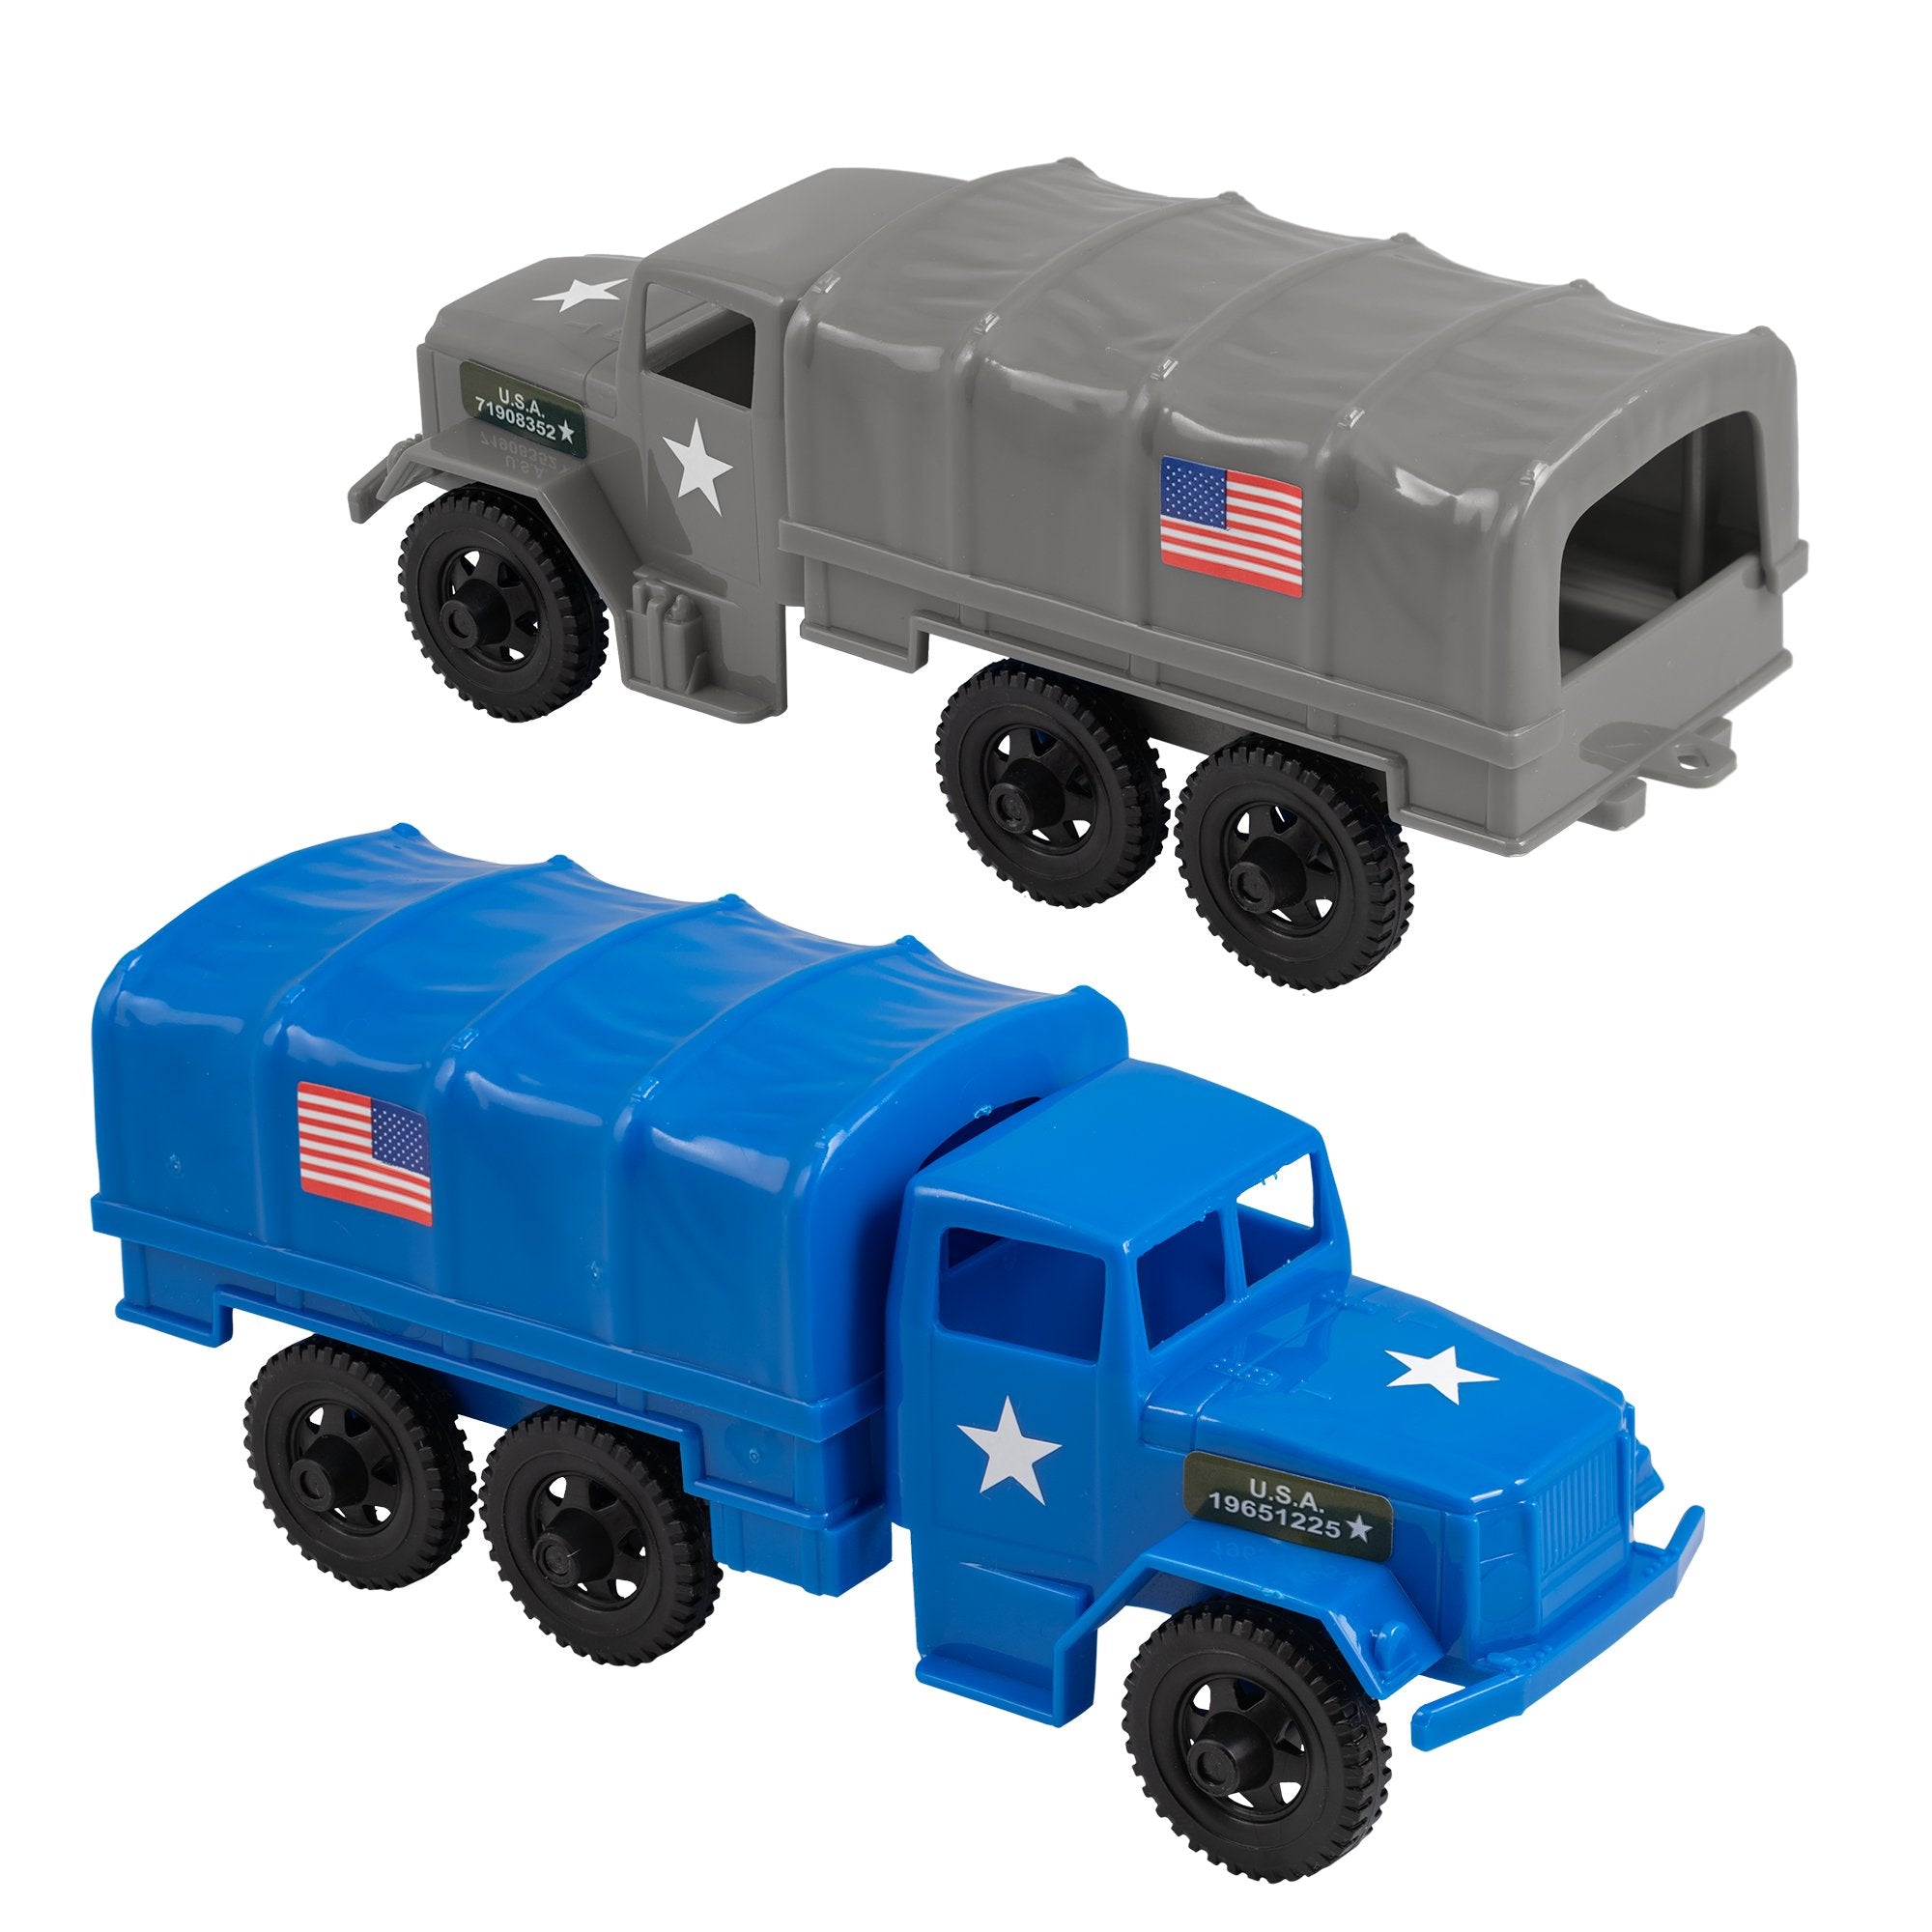 TimMee Plastic Army Men TRUCKS Deuce and a Half Cargo Vehicles US Made – Toys